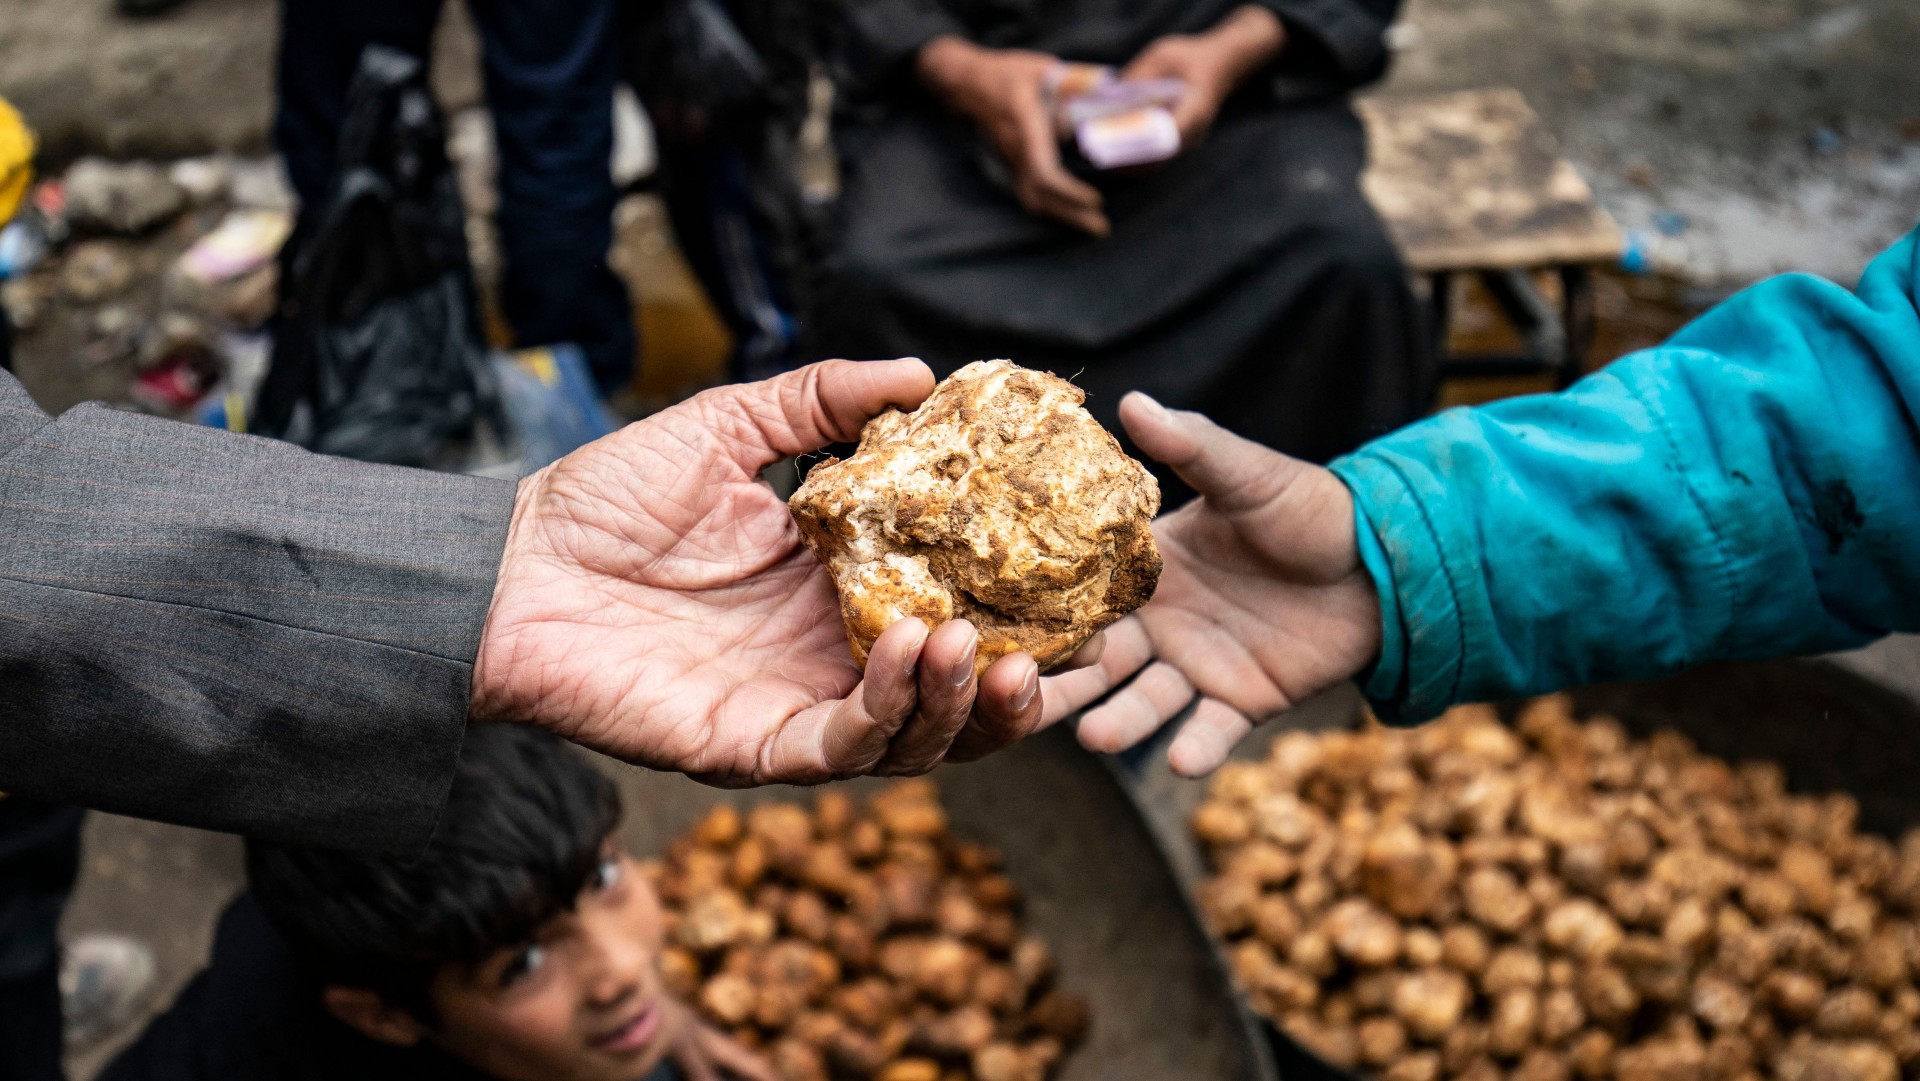 A customer buys a desert truffle from a merchant in a market in Syria's rebel-held northern city of Raqa on March 14, 2023. (Photo: Delil souleiman/AFP)